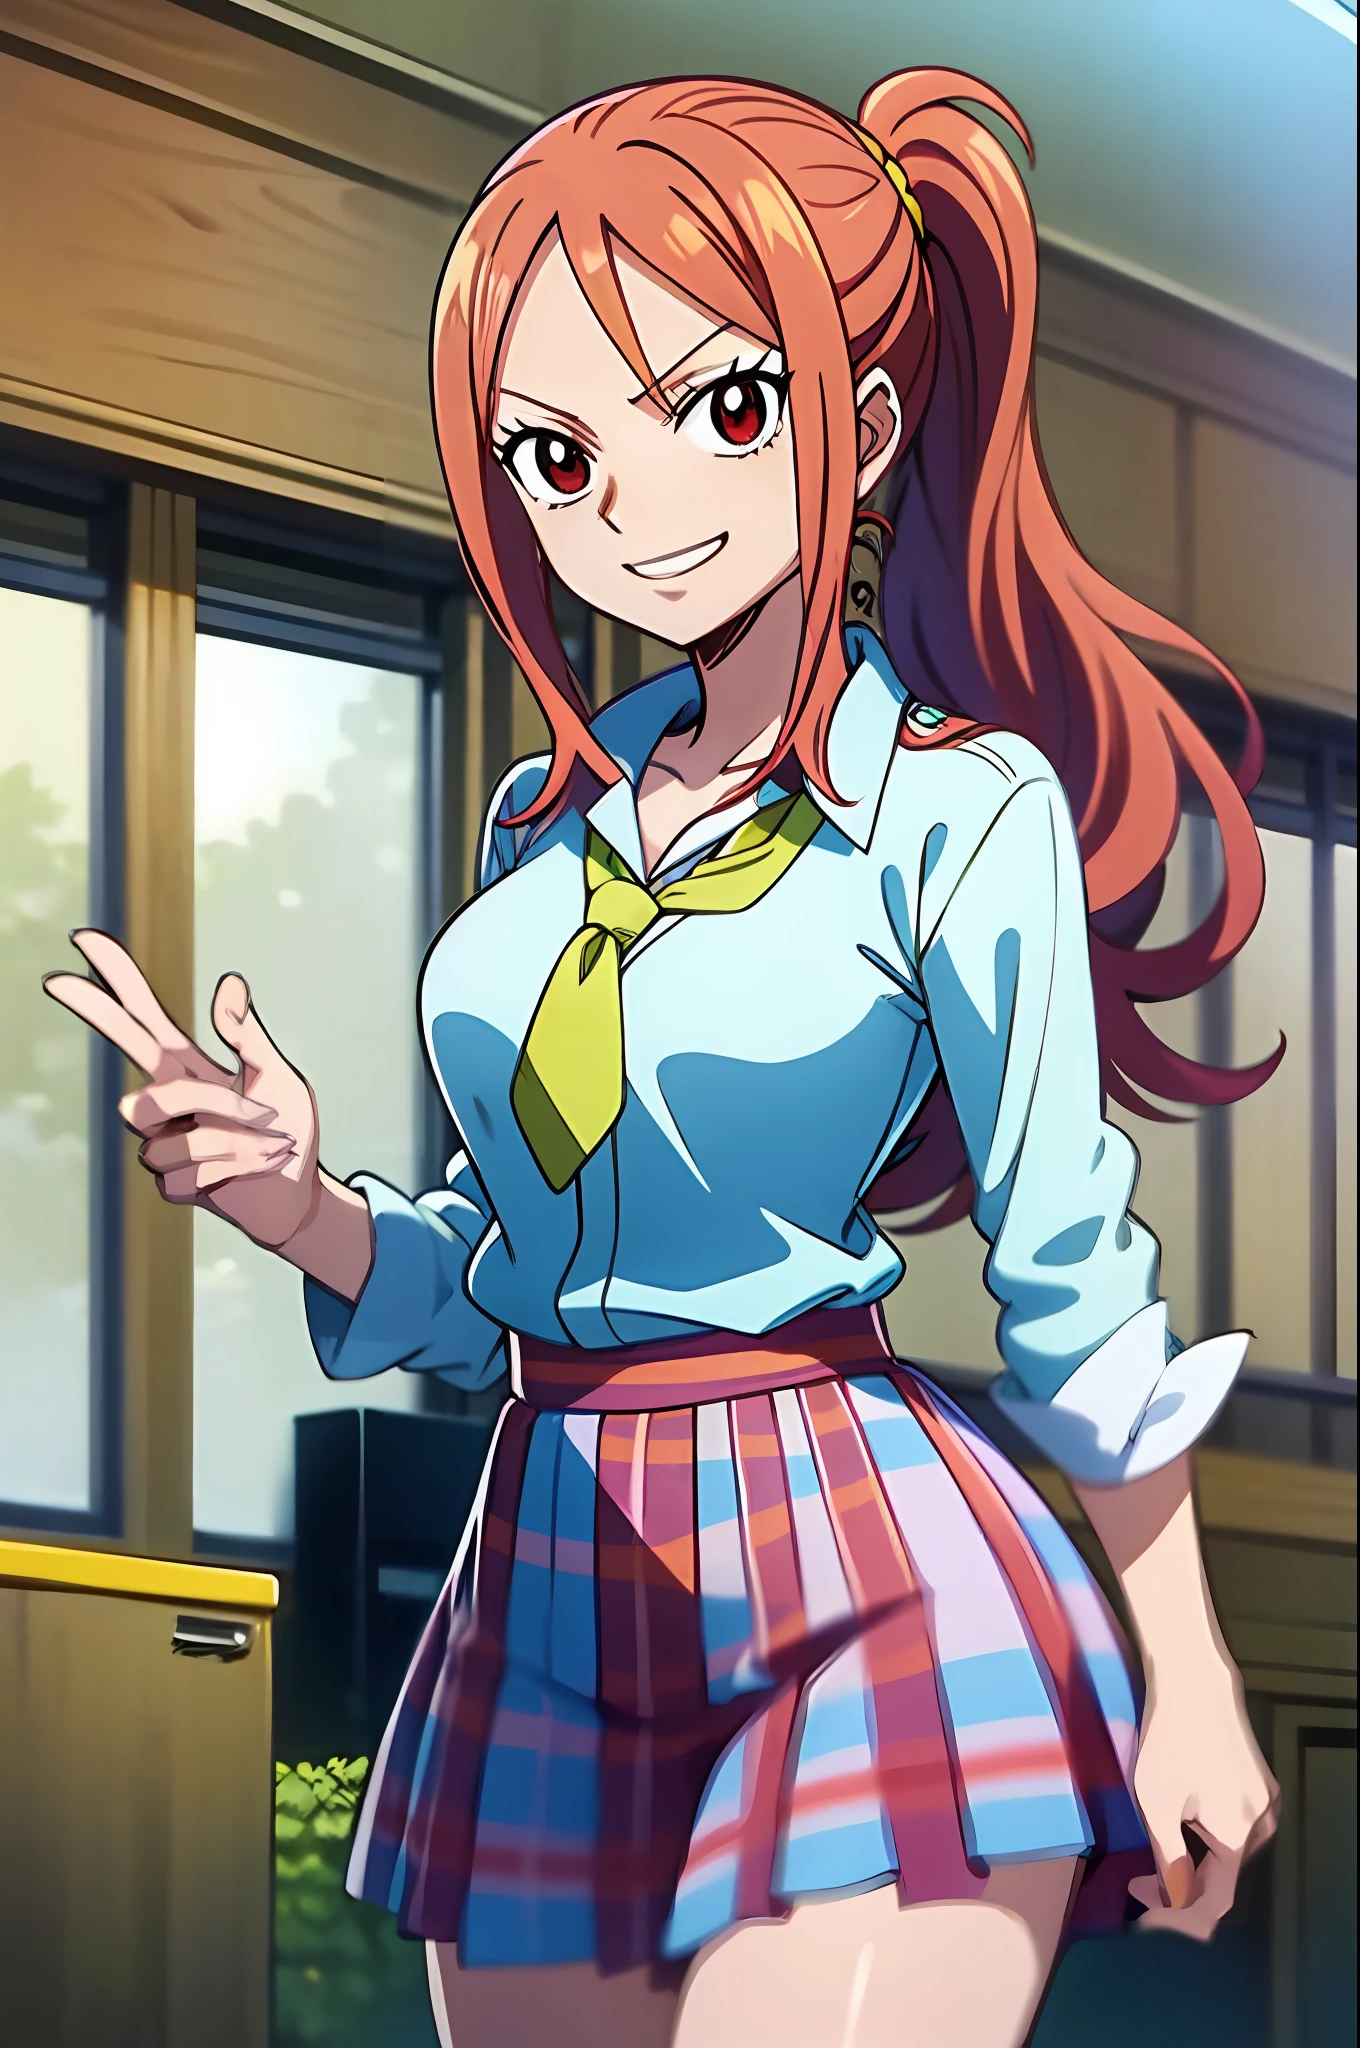 light smile,  attire, white blouse with yellow jacket, green striped tie, red plaid skirt, red eyes and red hair in a twin ponytail, (style of one piece and fairy tail anime), (illustrated by Eiichiro Oda and Hiro Mashima), (style mixing), Lucy Heartfilia, Nami